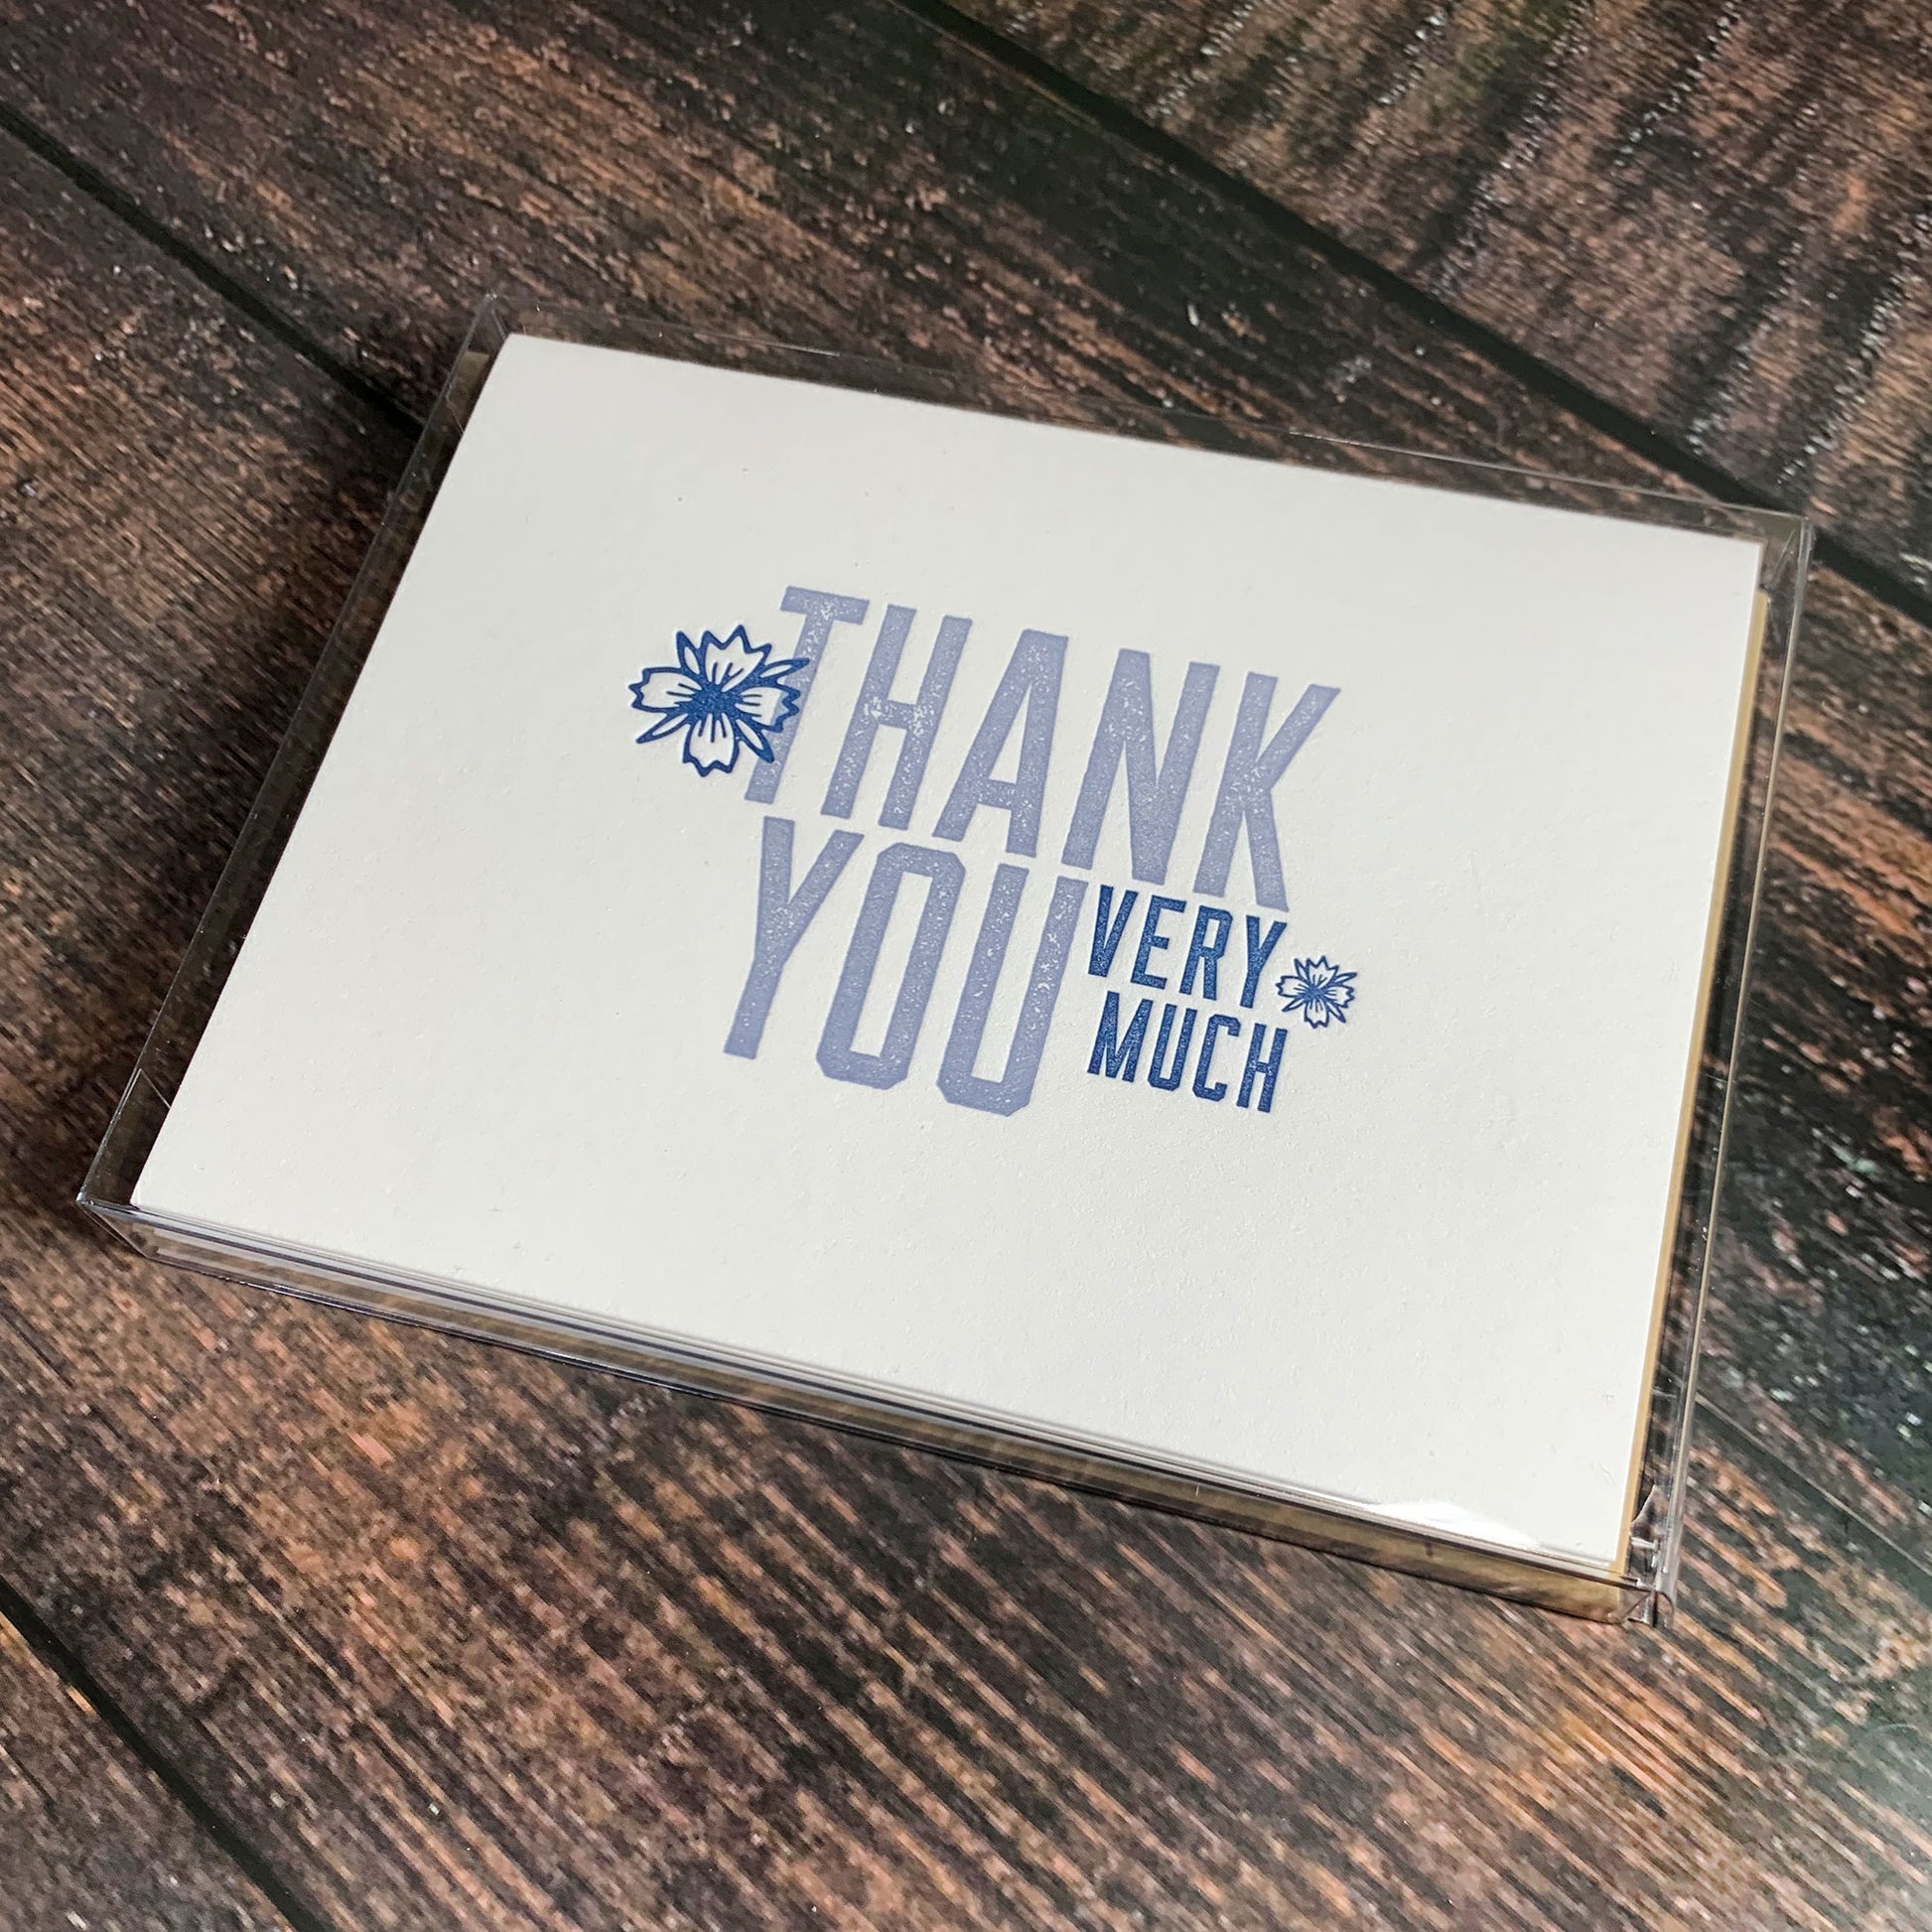 Packaged box set of thank you notes, set of 6 thank you cards, Letterpress printed, includes envelope